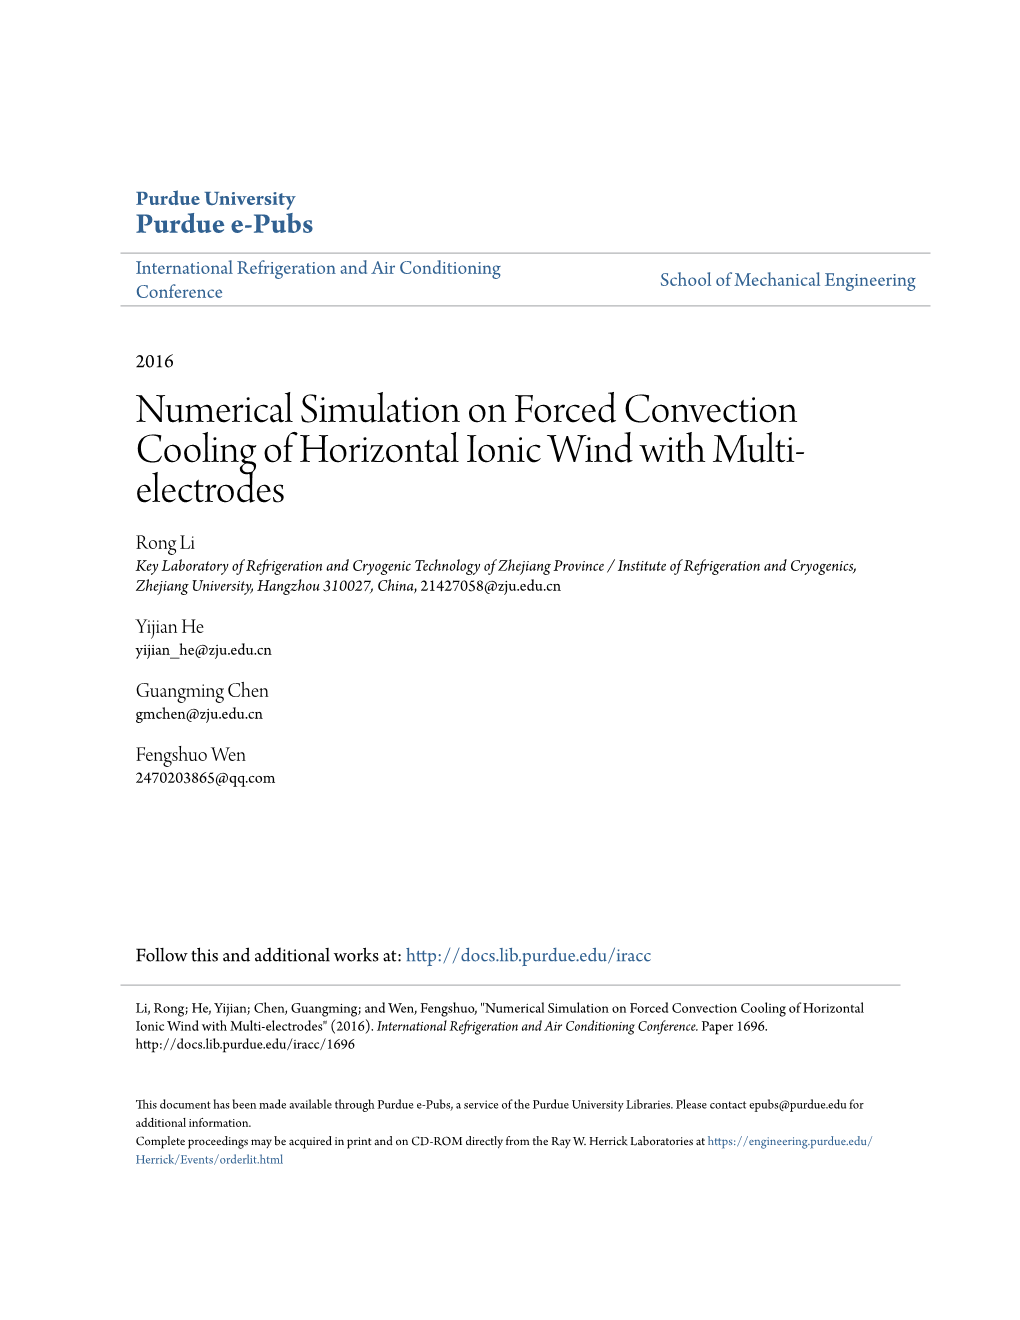 Numerical Simulation on Forced Convection Cooling of Horizontal